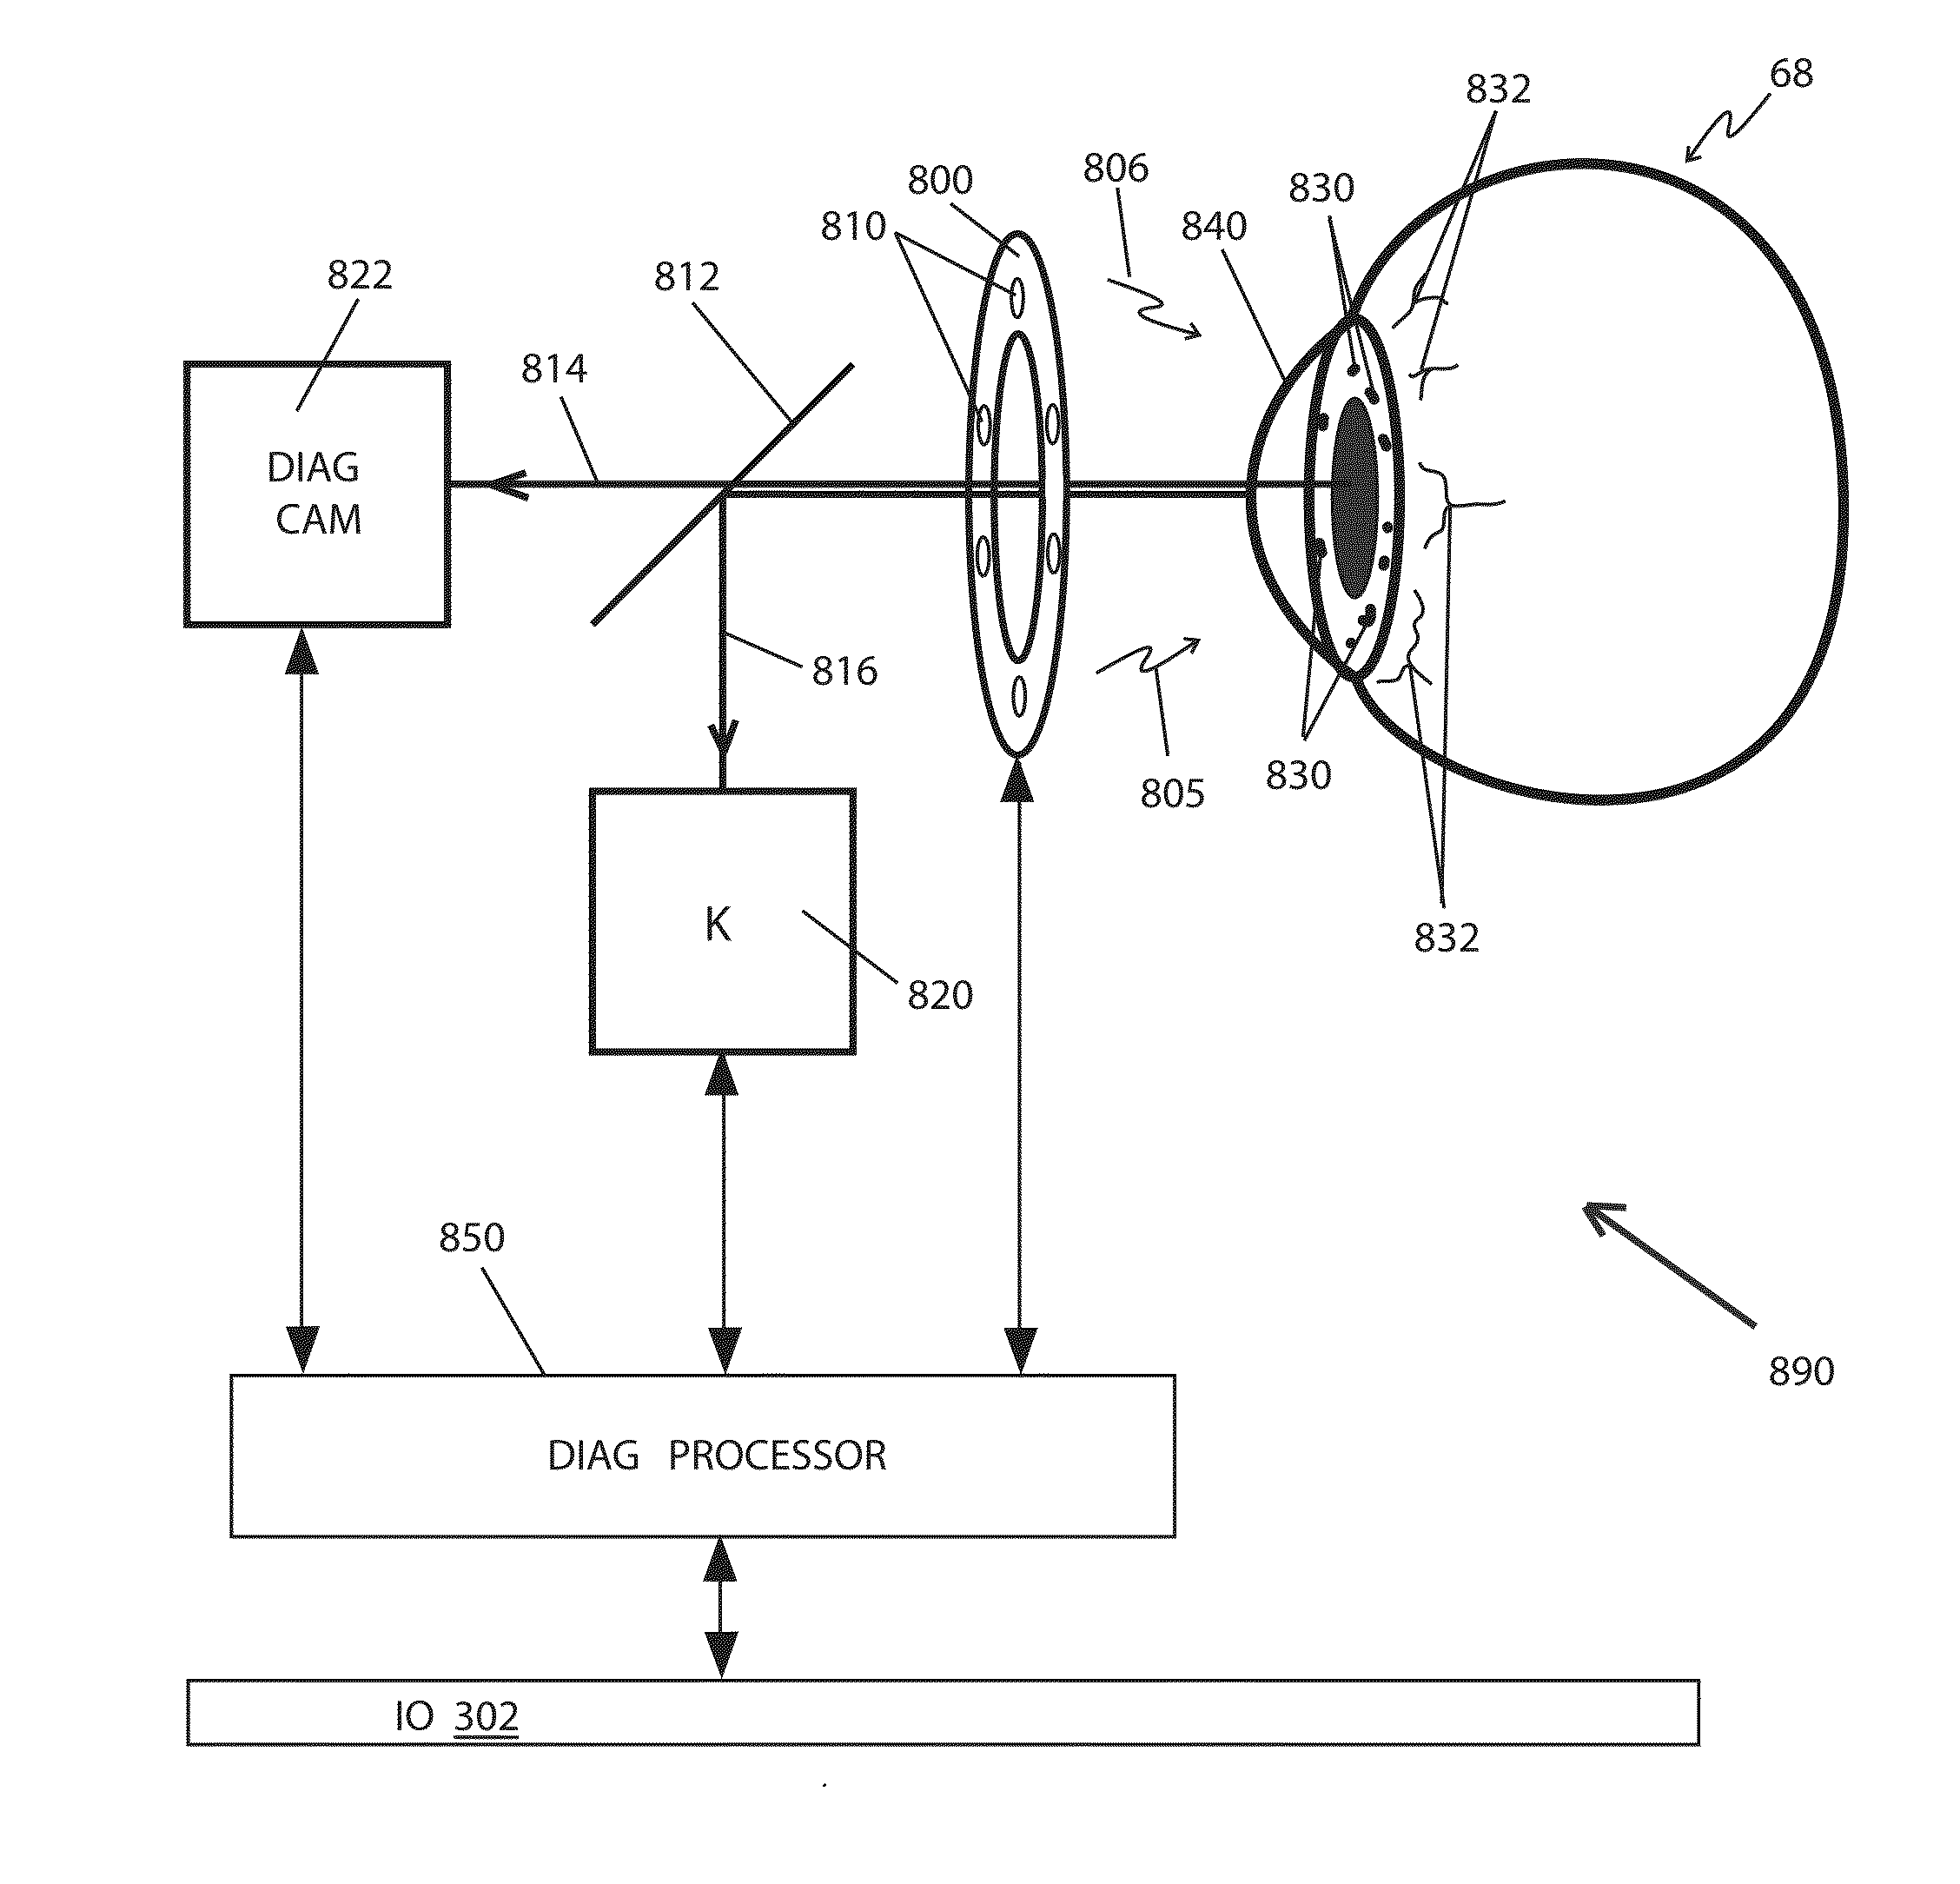 Method for Alignment of Intraocular Lens